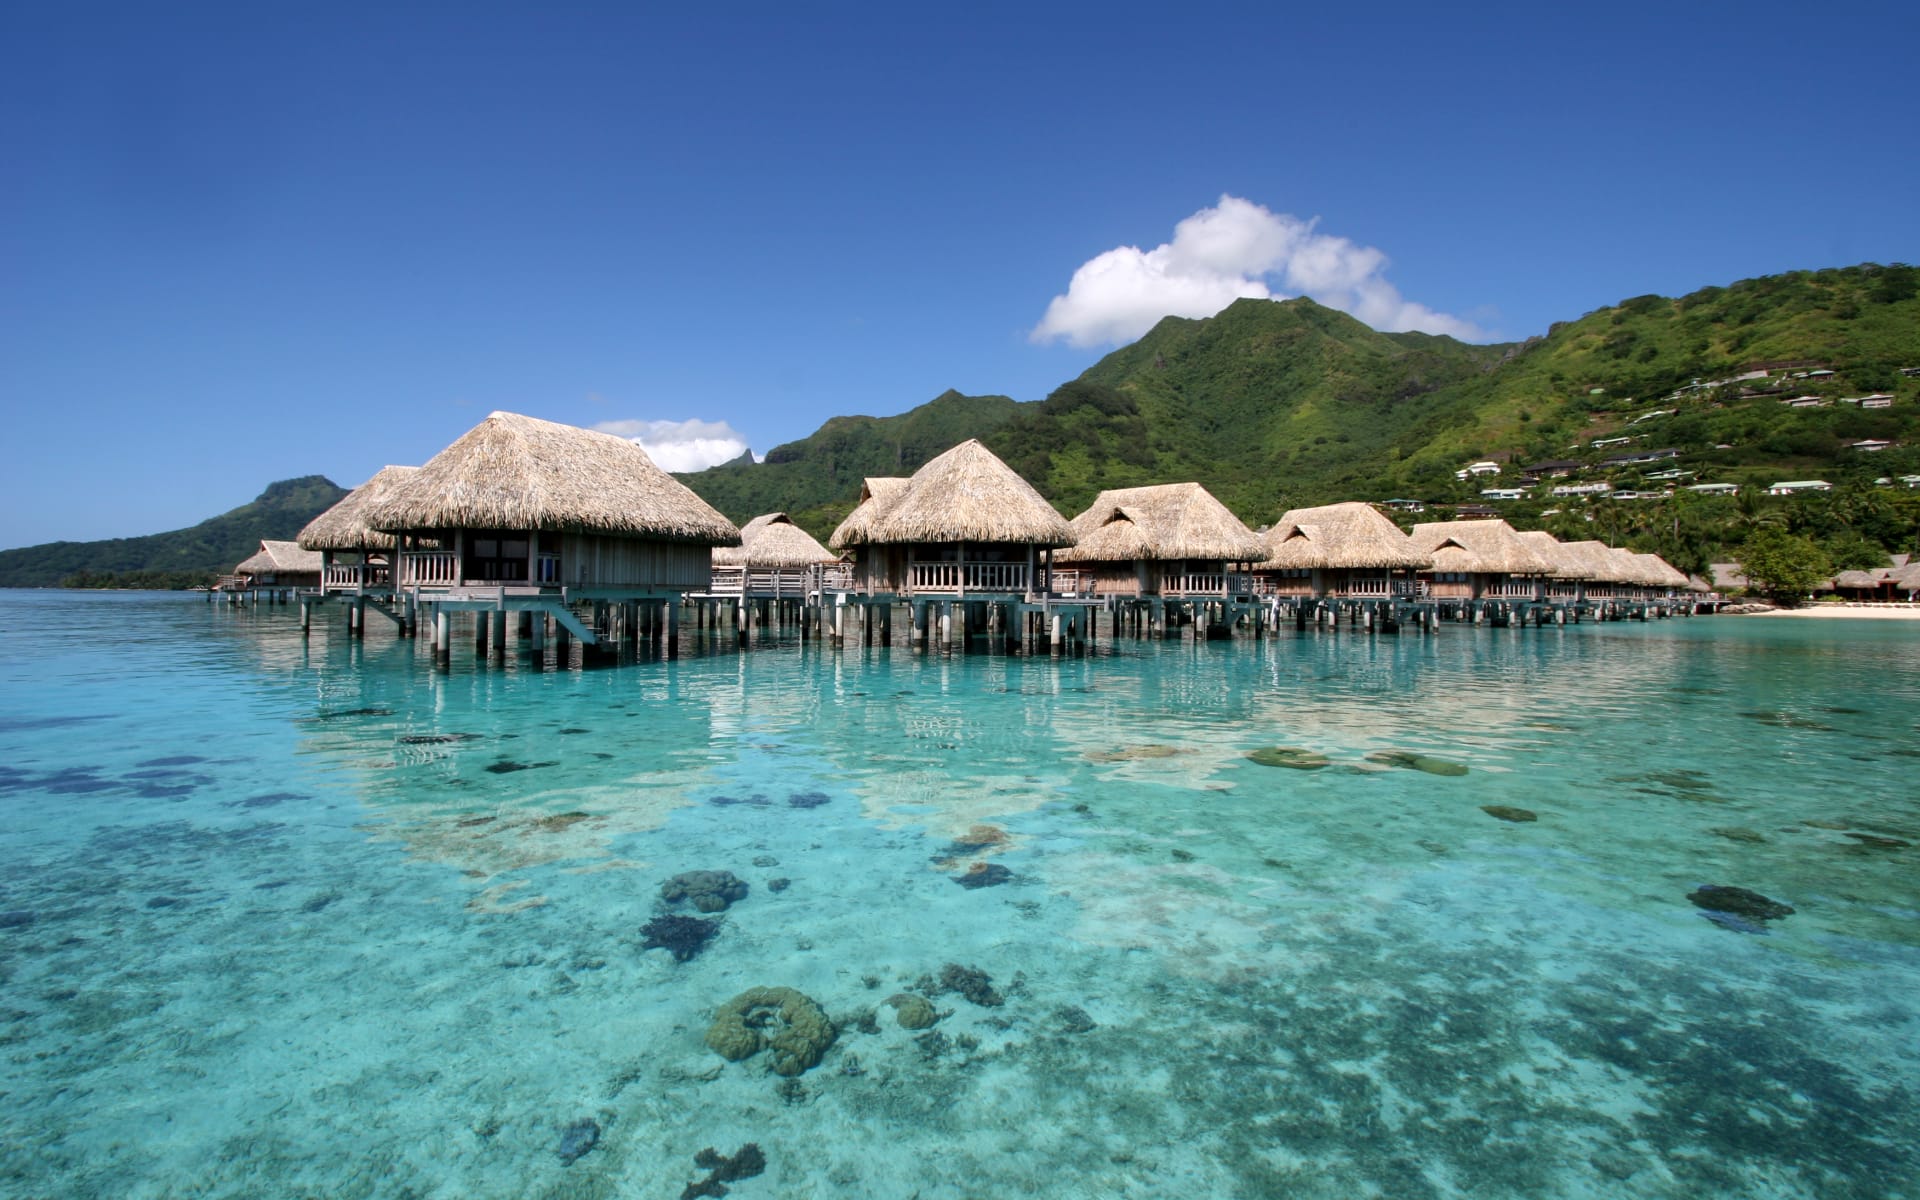 overwater villas with mountains in the background